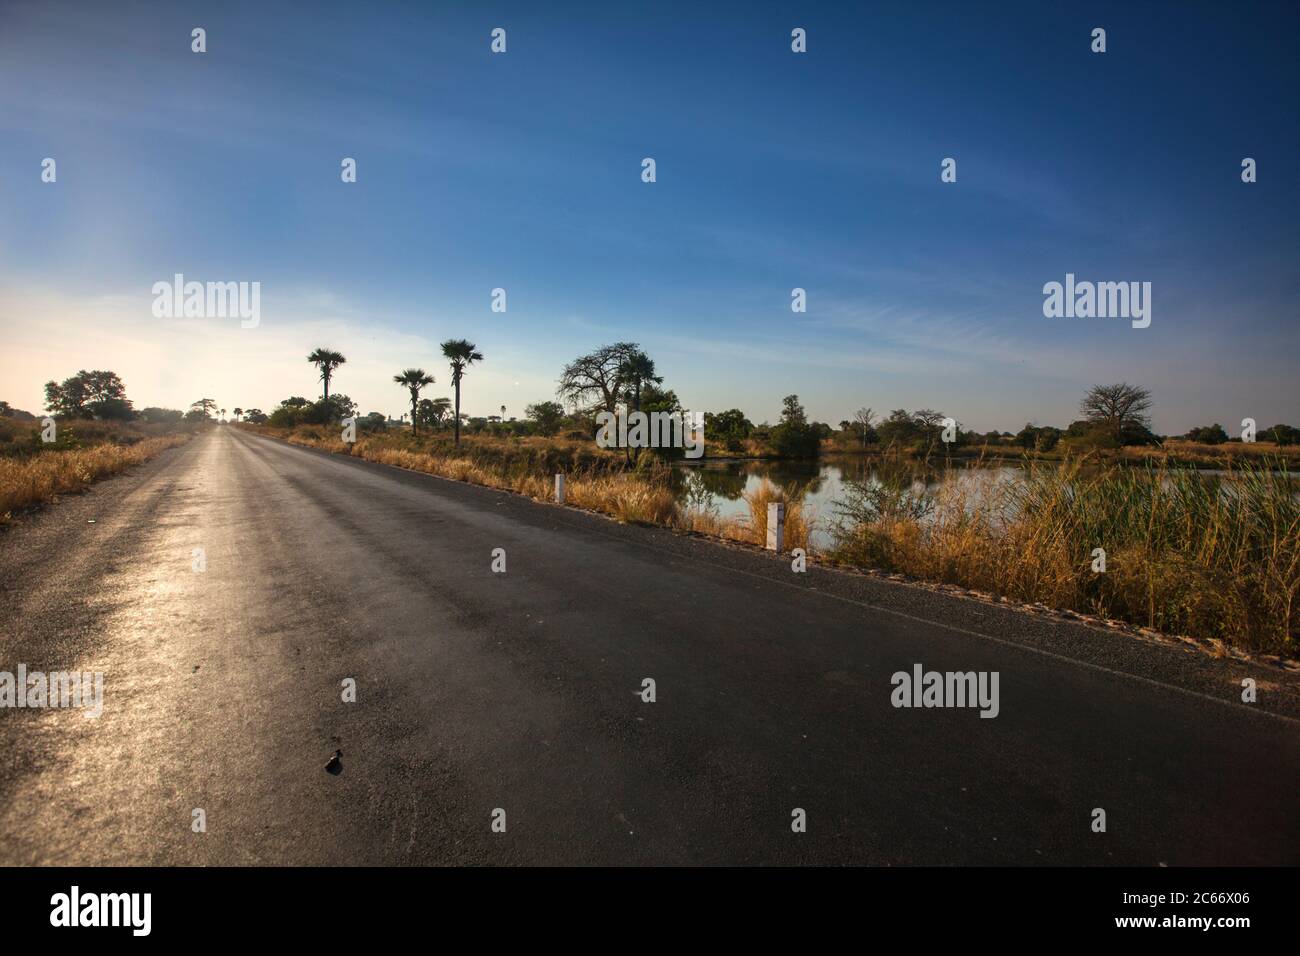 wetland in The Gambia Stock Photo